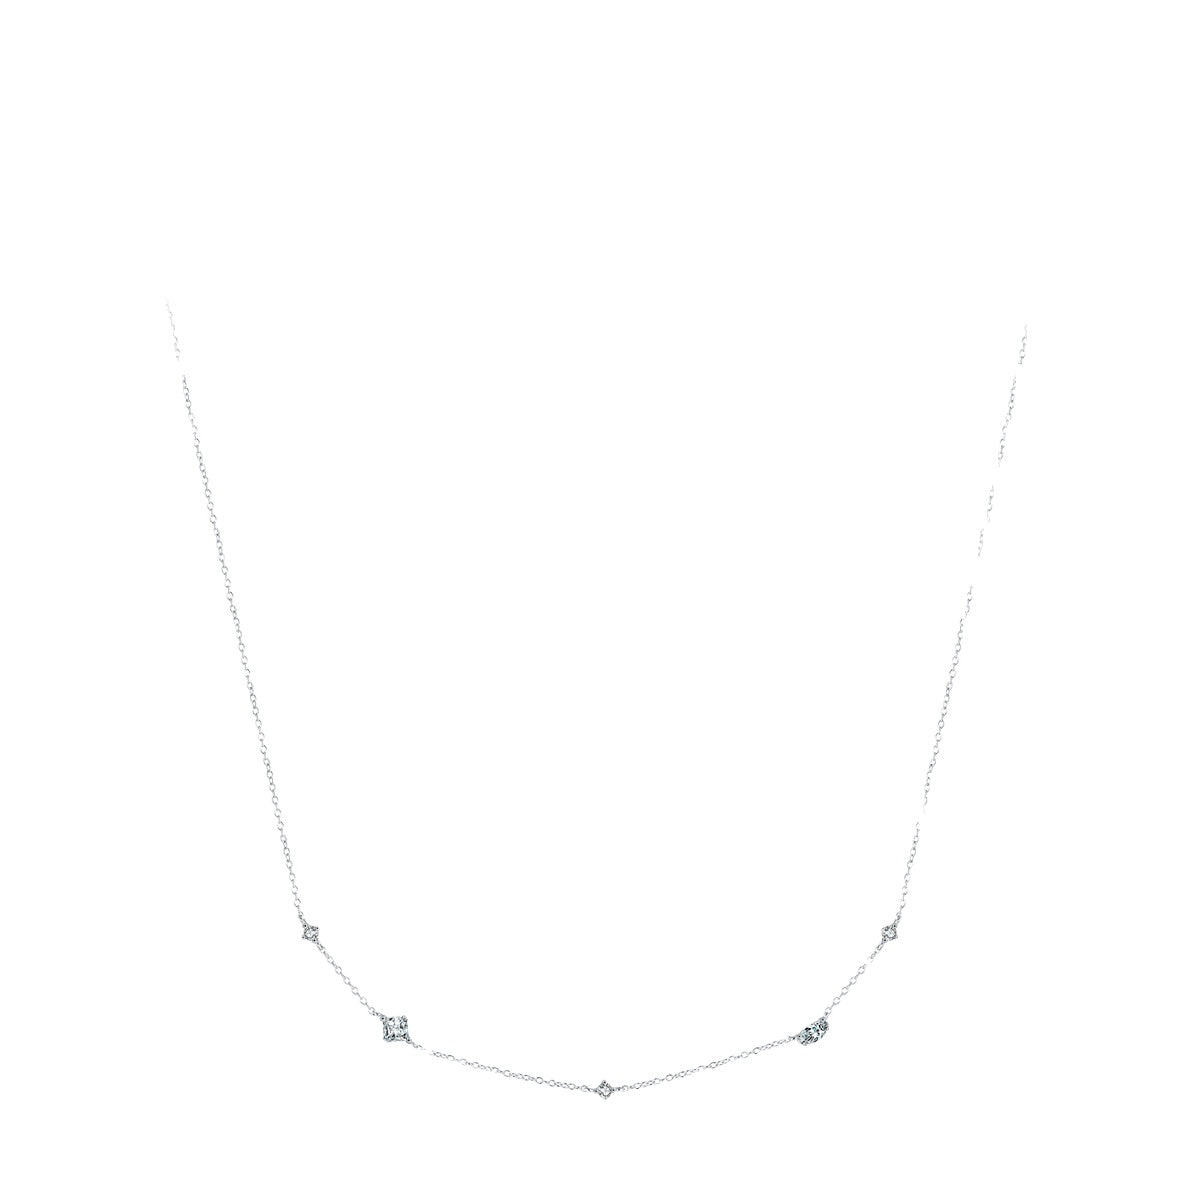 S925 Sterling Silver Summer Breeze Necklace with Zircon Accent